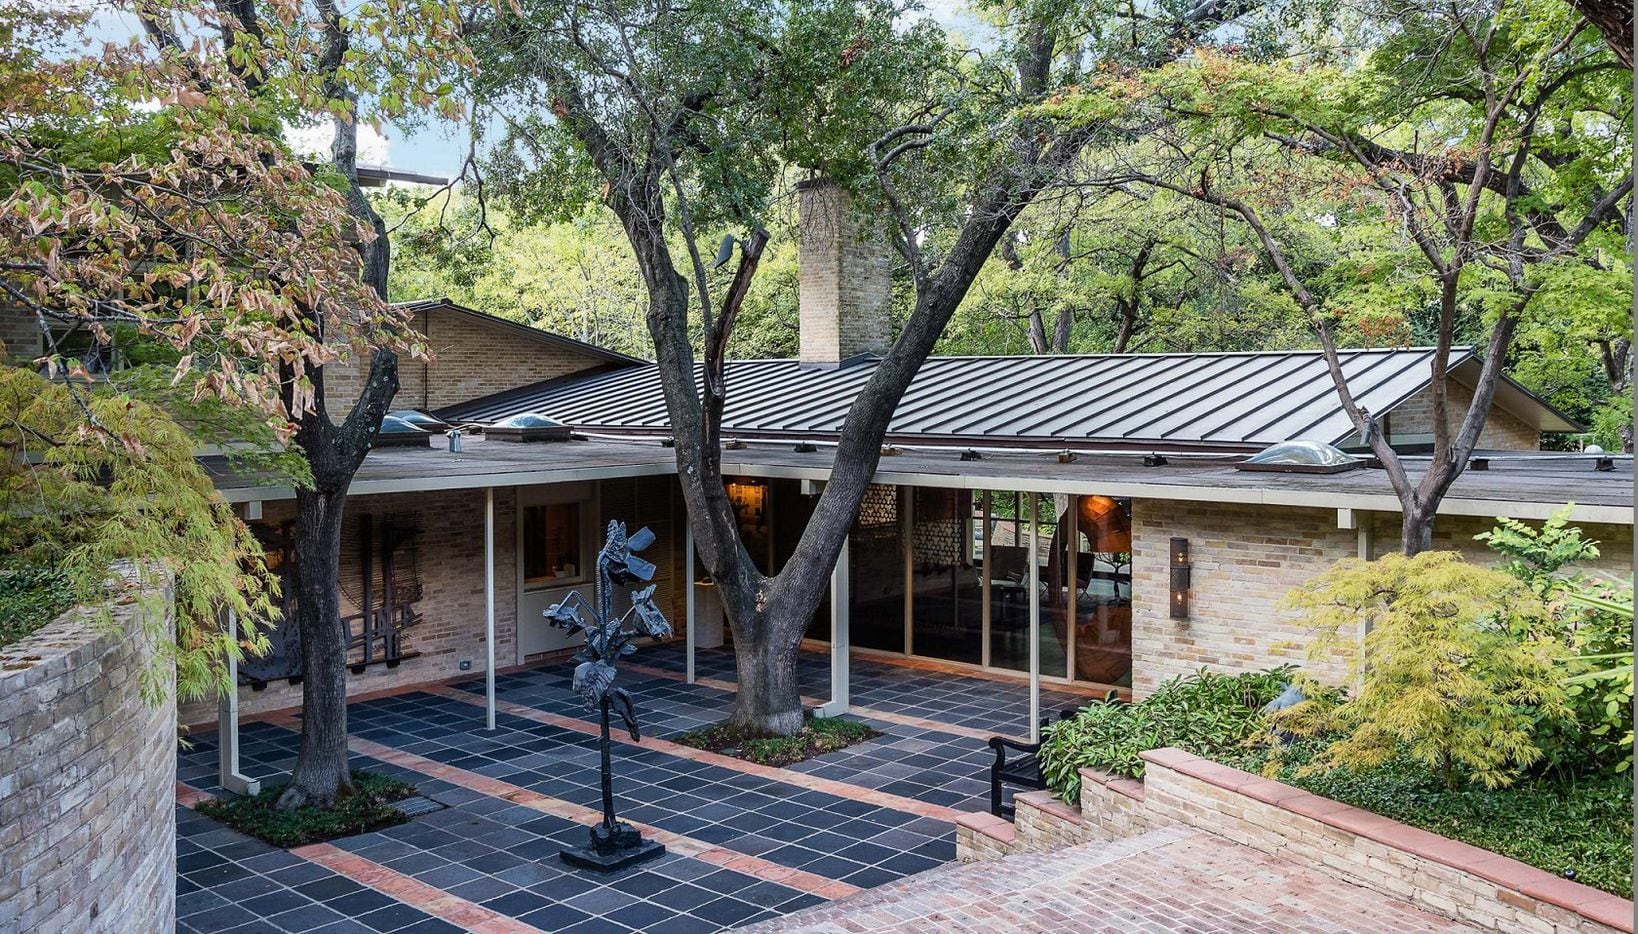 A look at the Haggerty House on Preservation Dallas  Modern Masterpieces Fall Architectural...